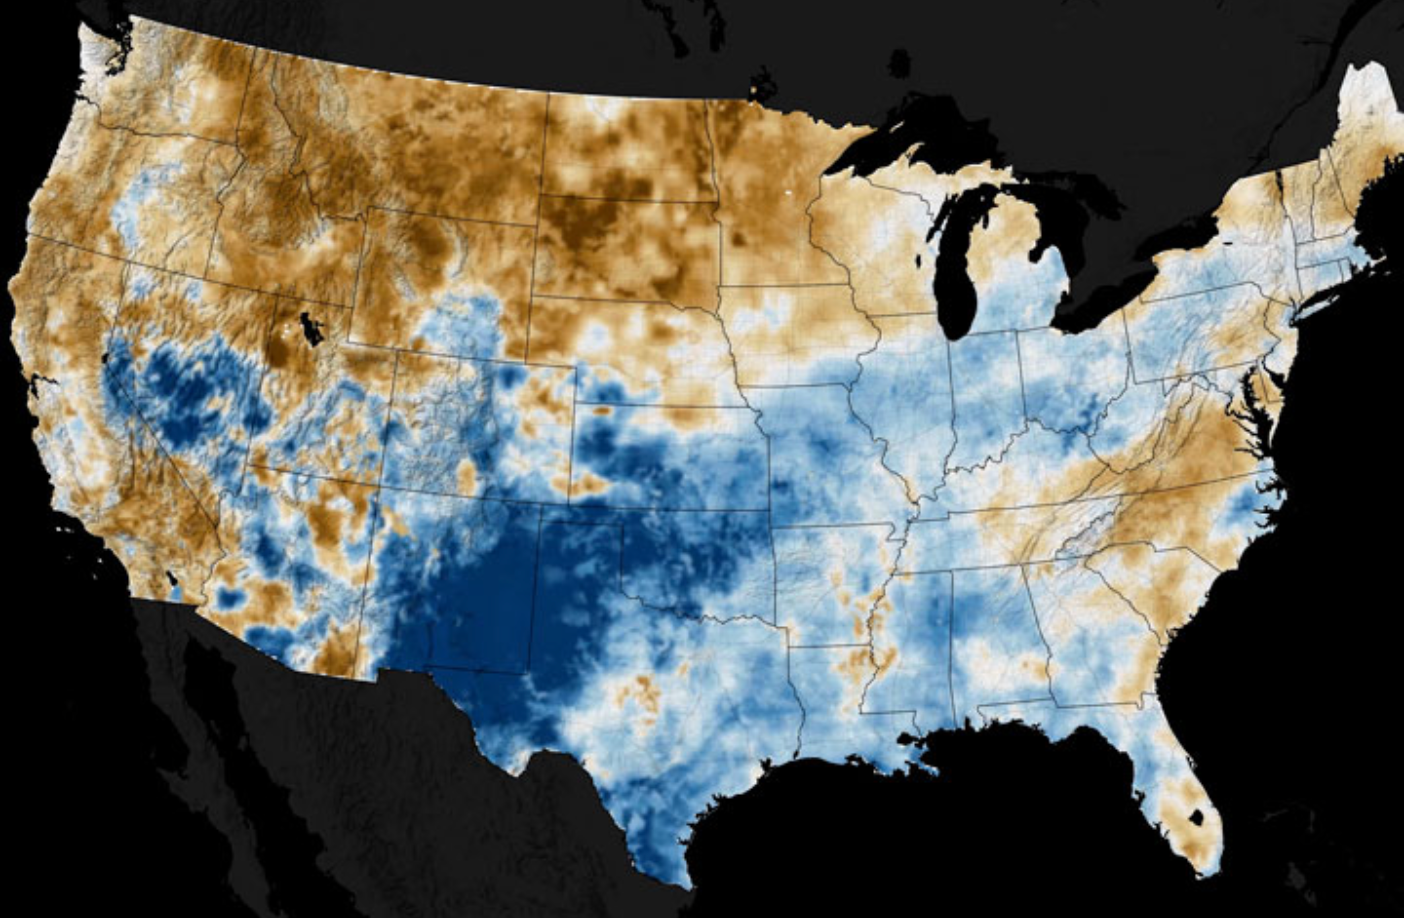 Still from animation, based on data from Crop-CASMA, showing soil moisture anomalies in the top 10 centimeters (4 inches) of the ground across the conterminous United States